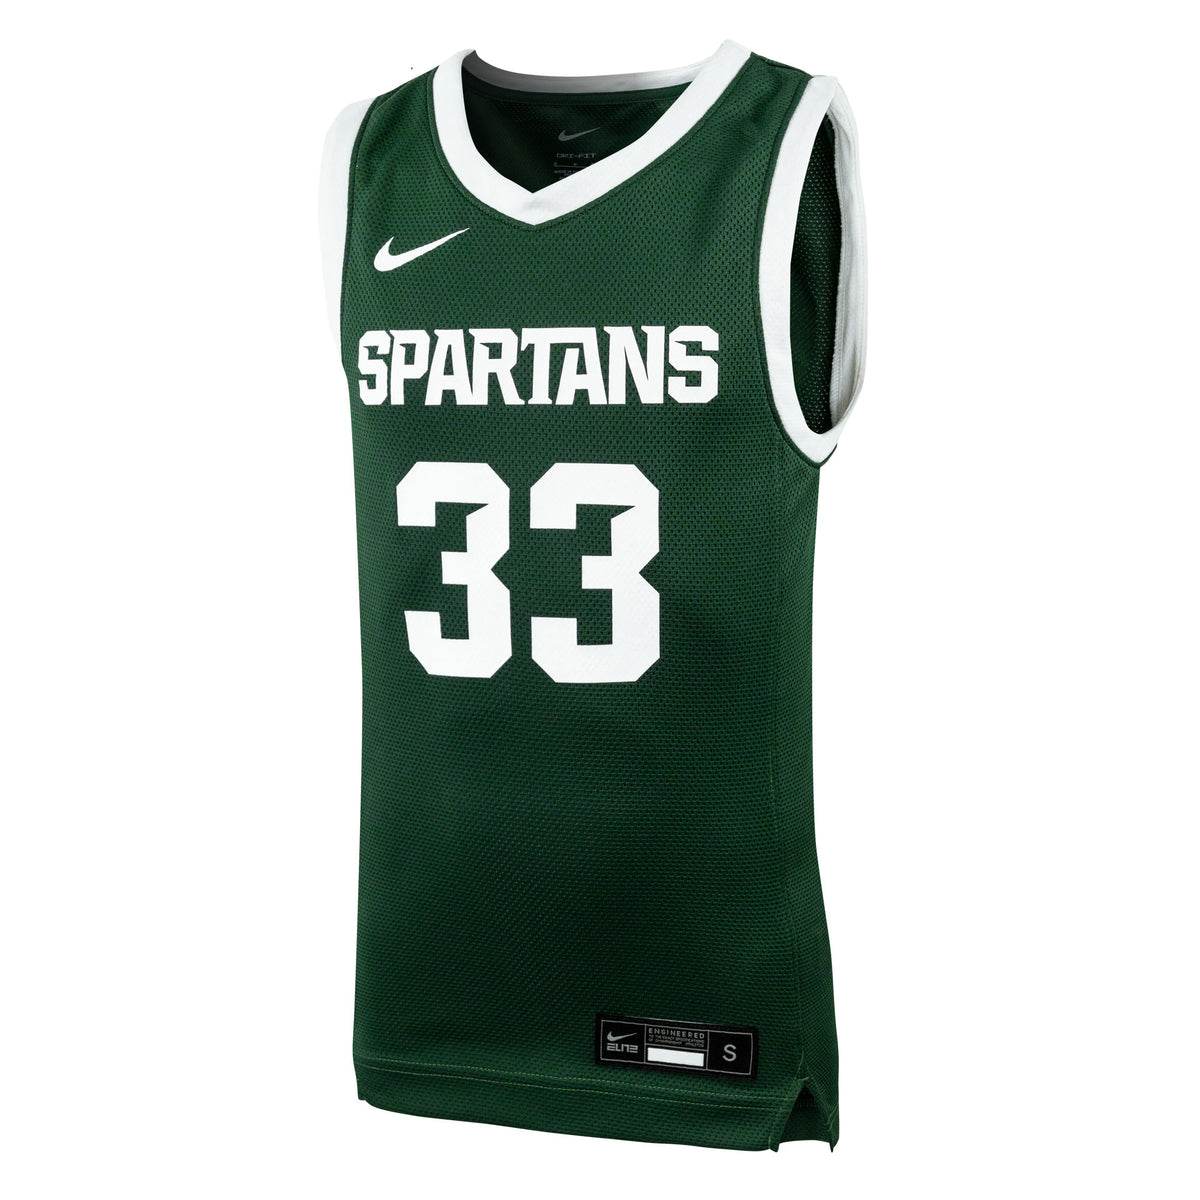 Michigan State Spartans Basketball Jerseys - Spartans Store